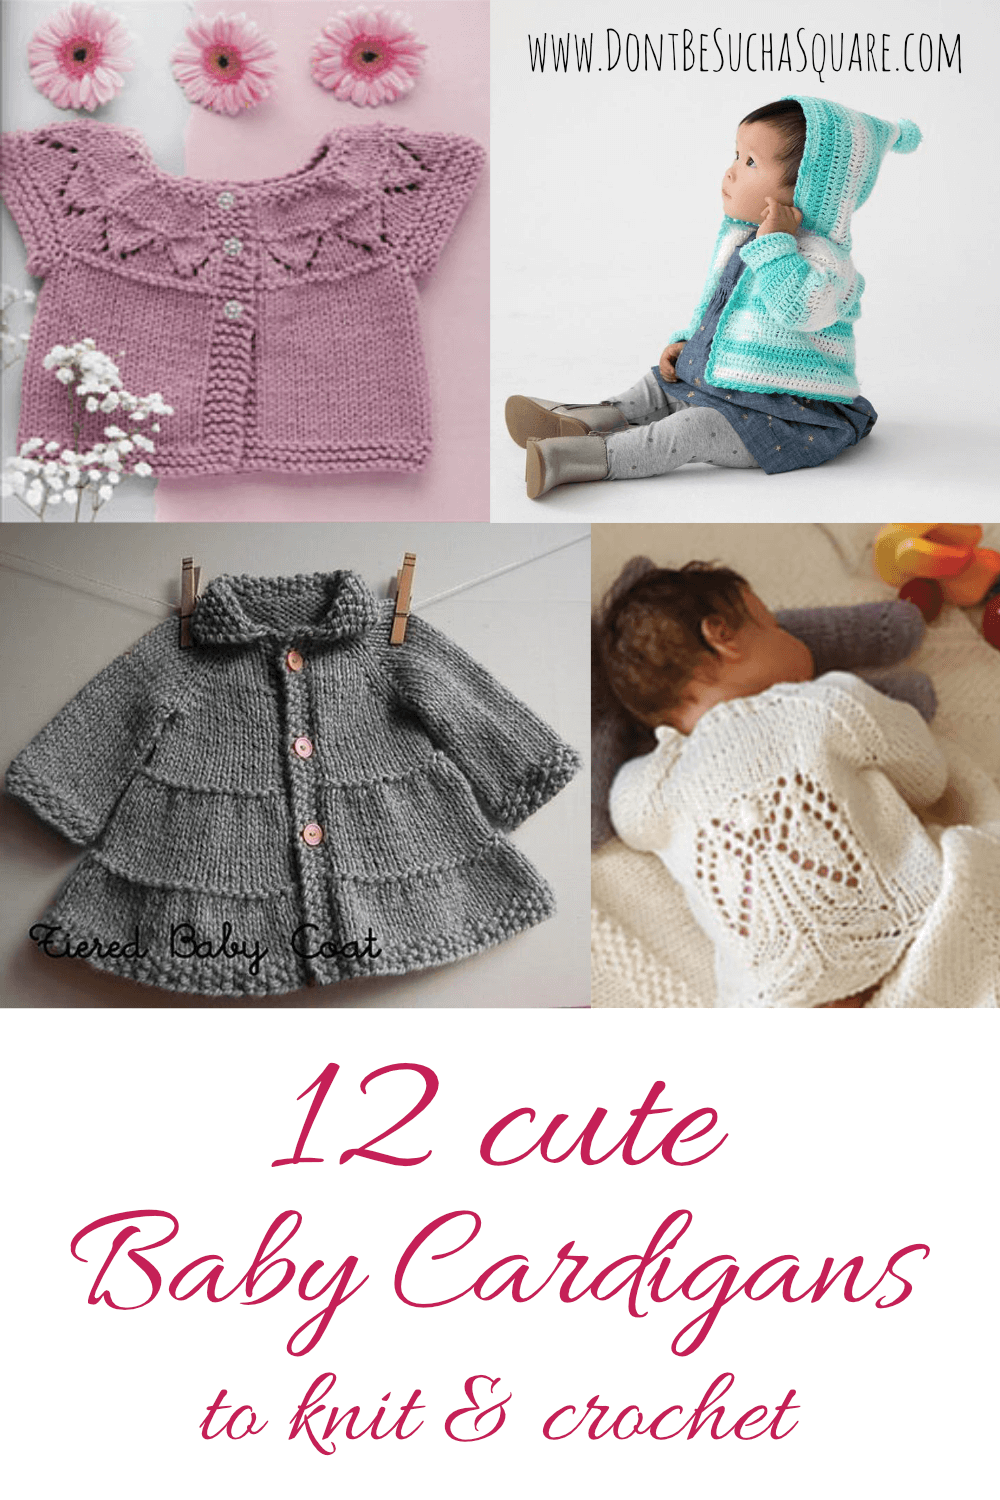 12 cute baby cardigan knitting and crochet patterns